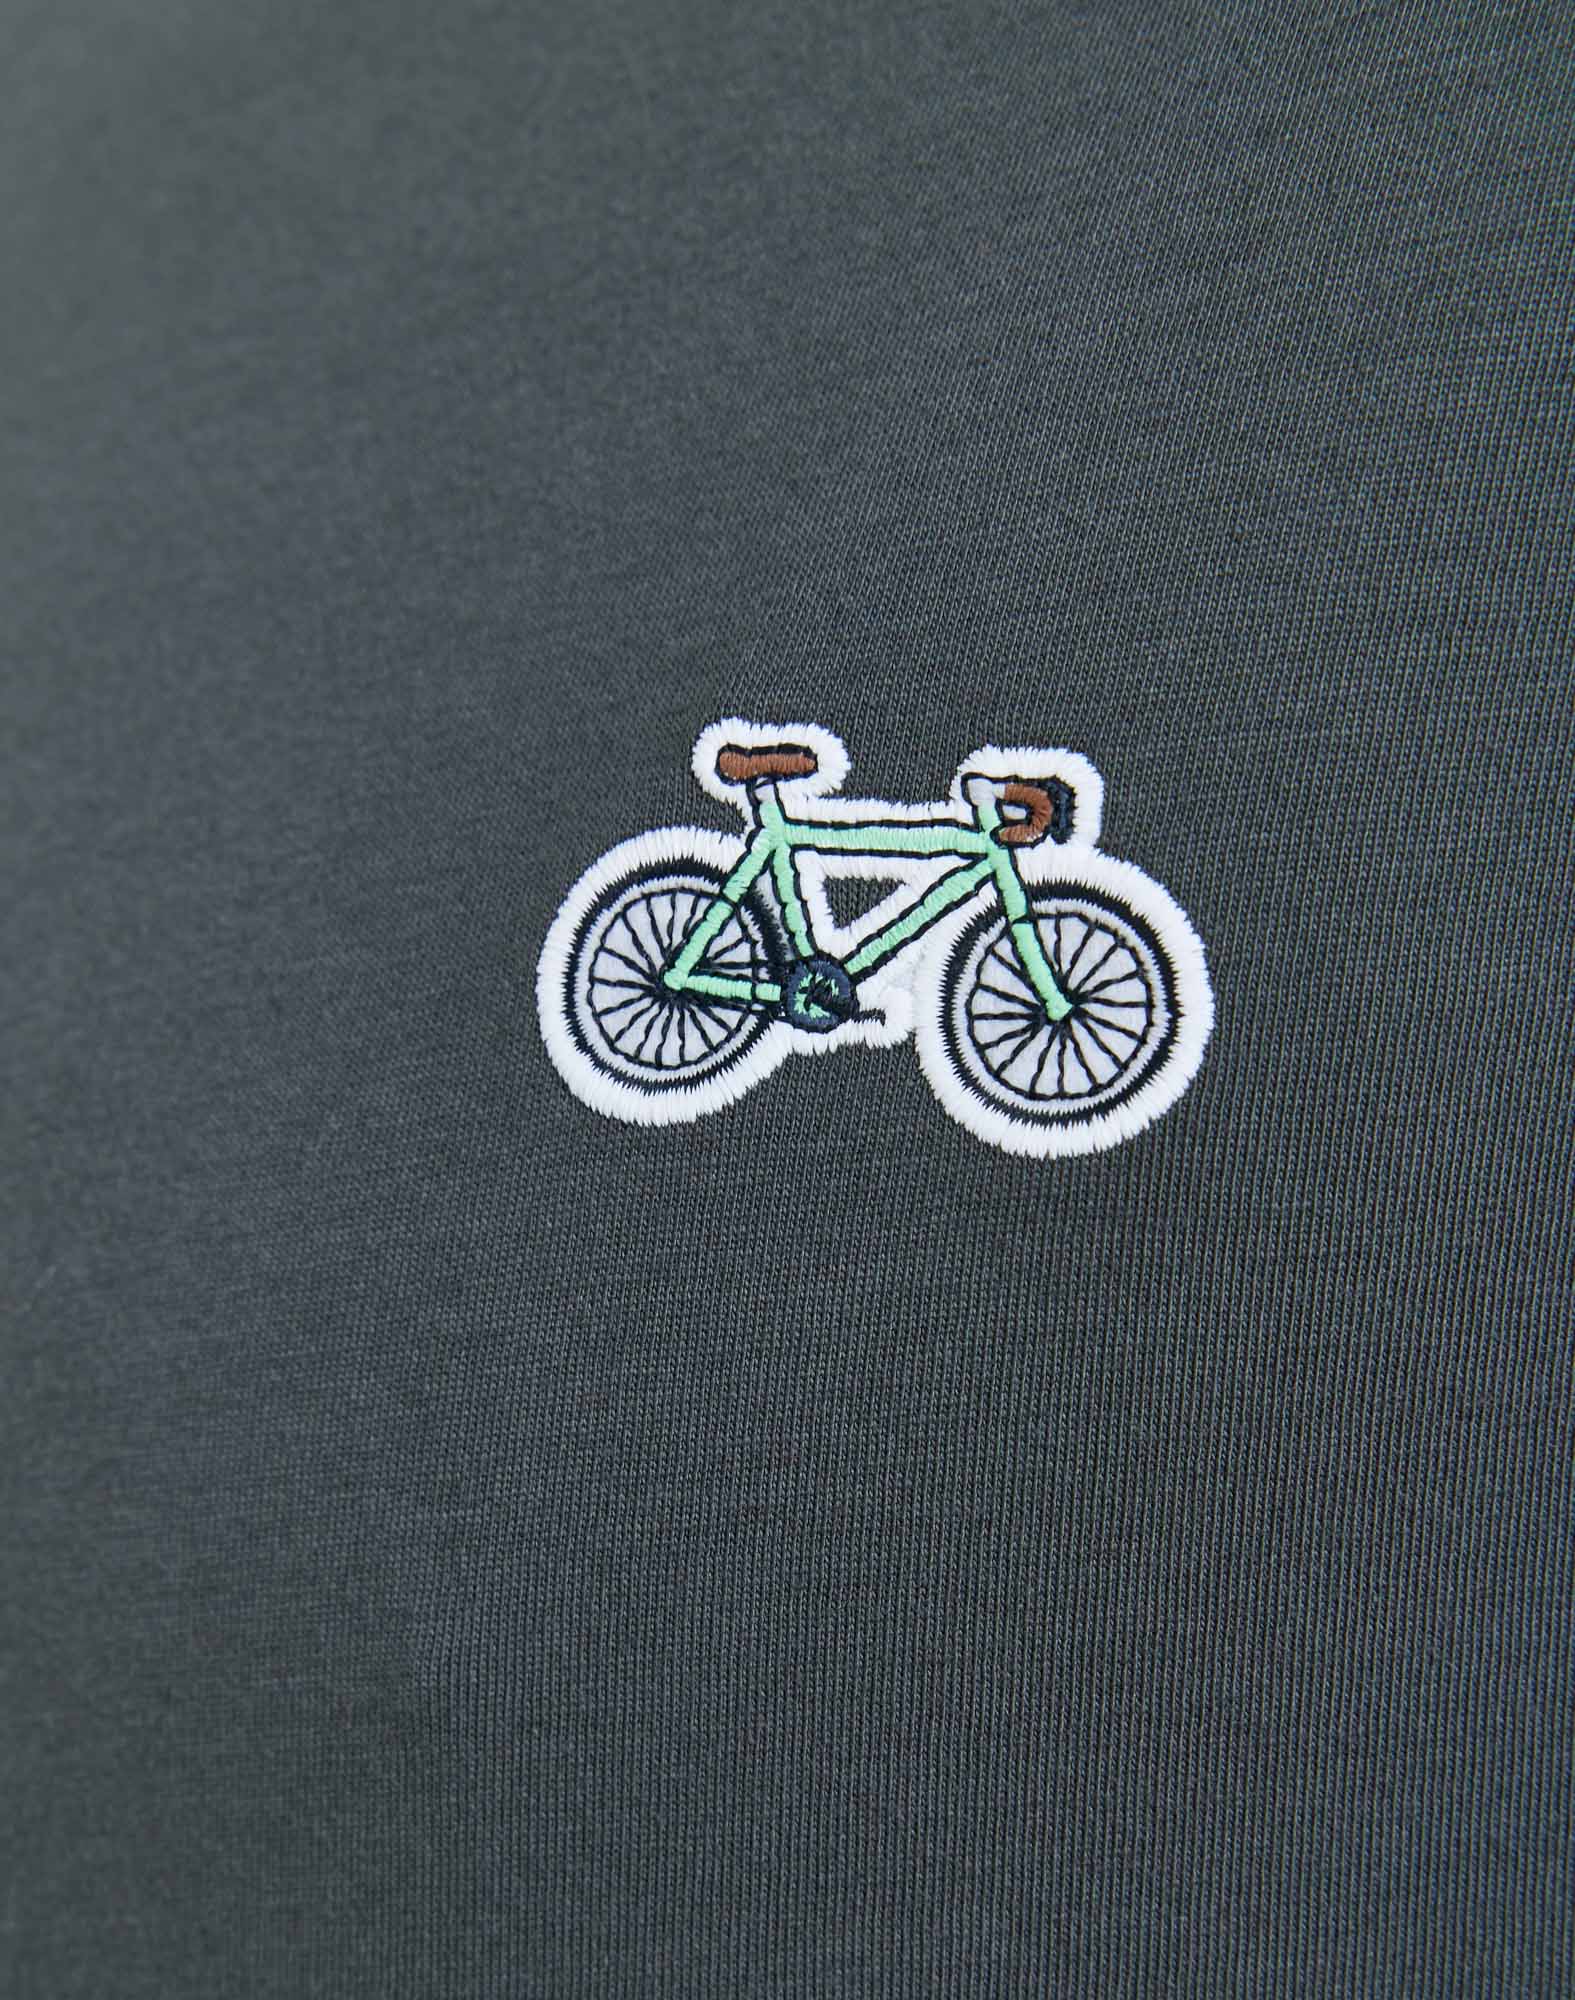 T-Shirt Patch Cycle